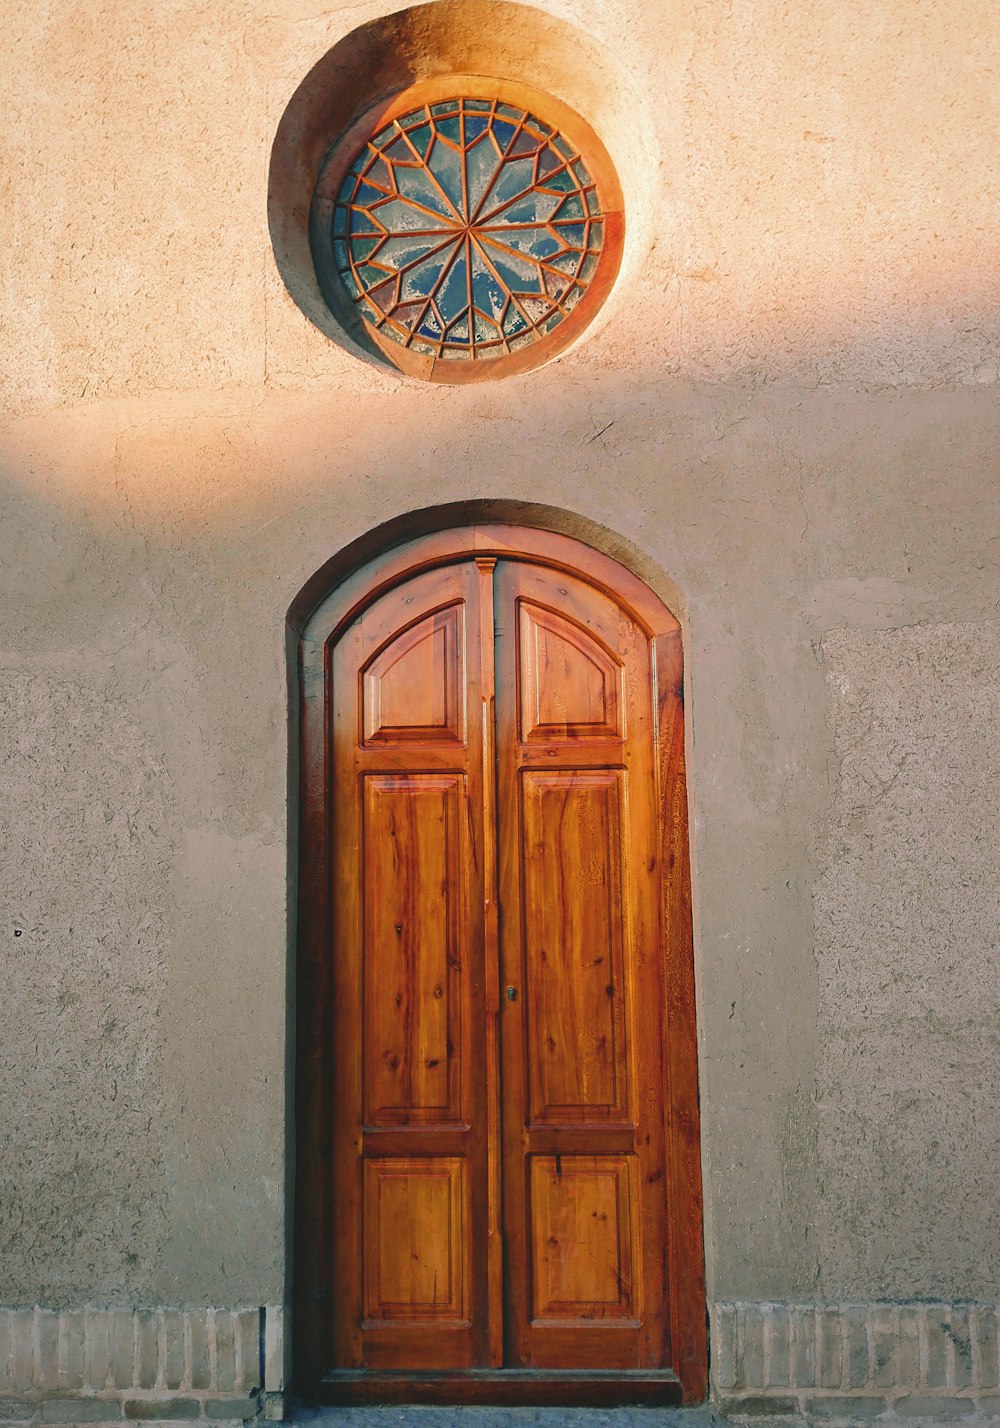 a wooden door with a circular window above it